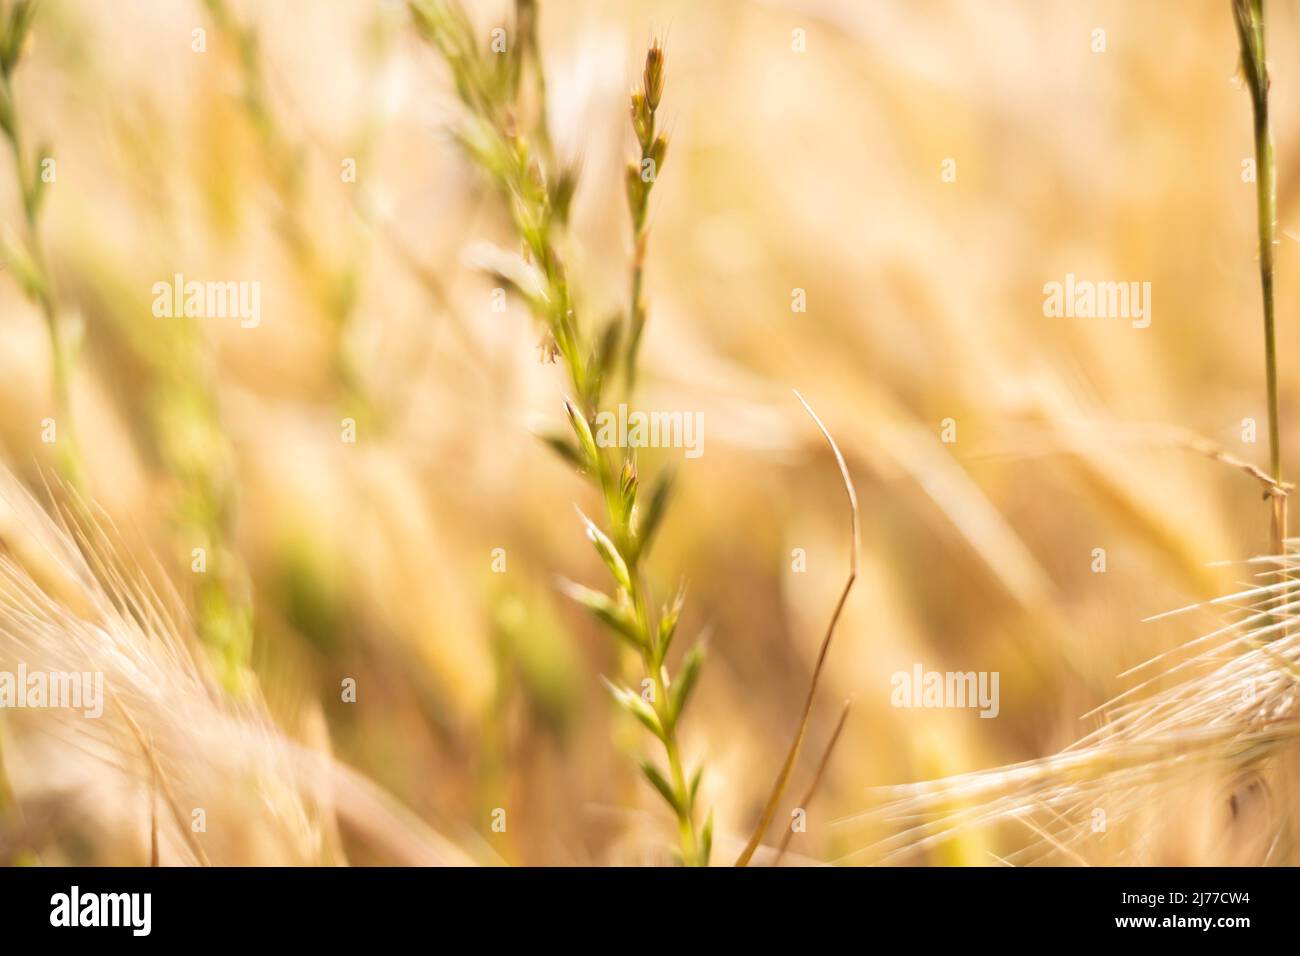 golden field of wild grasses, which look like wheat. Spain Stock Photo